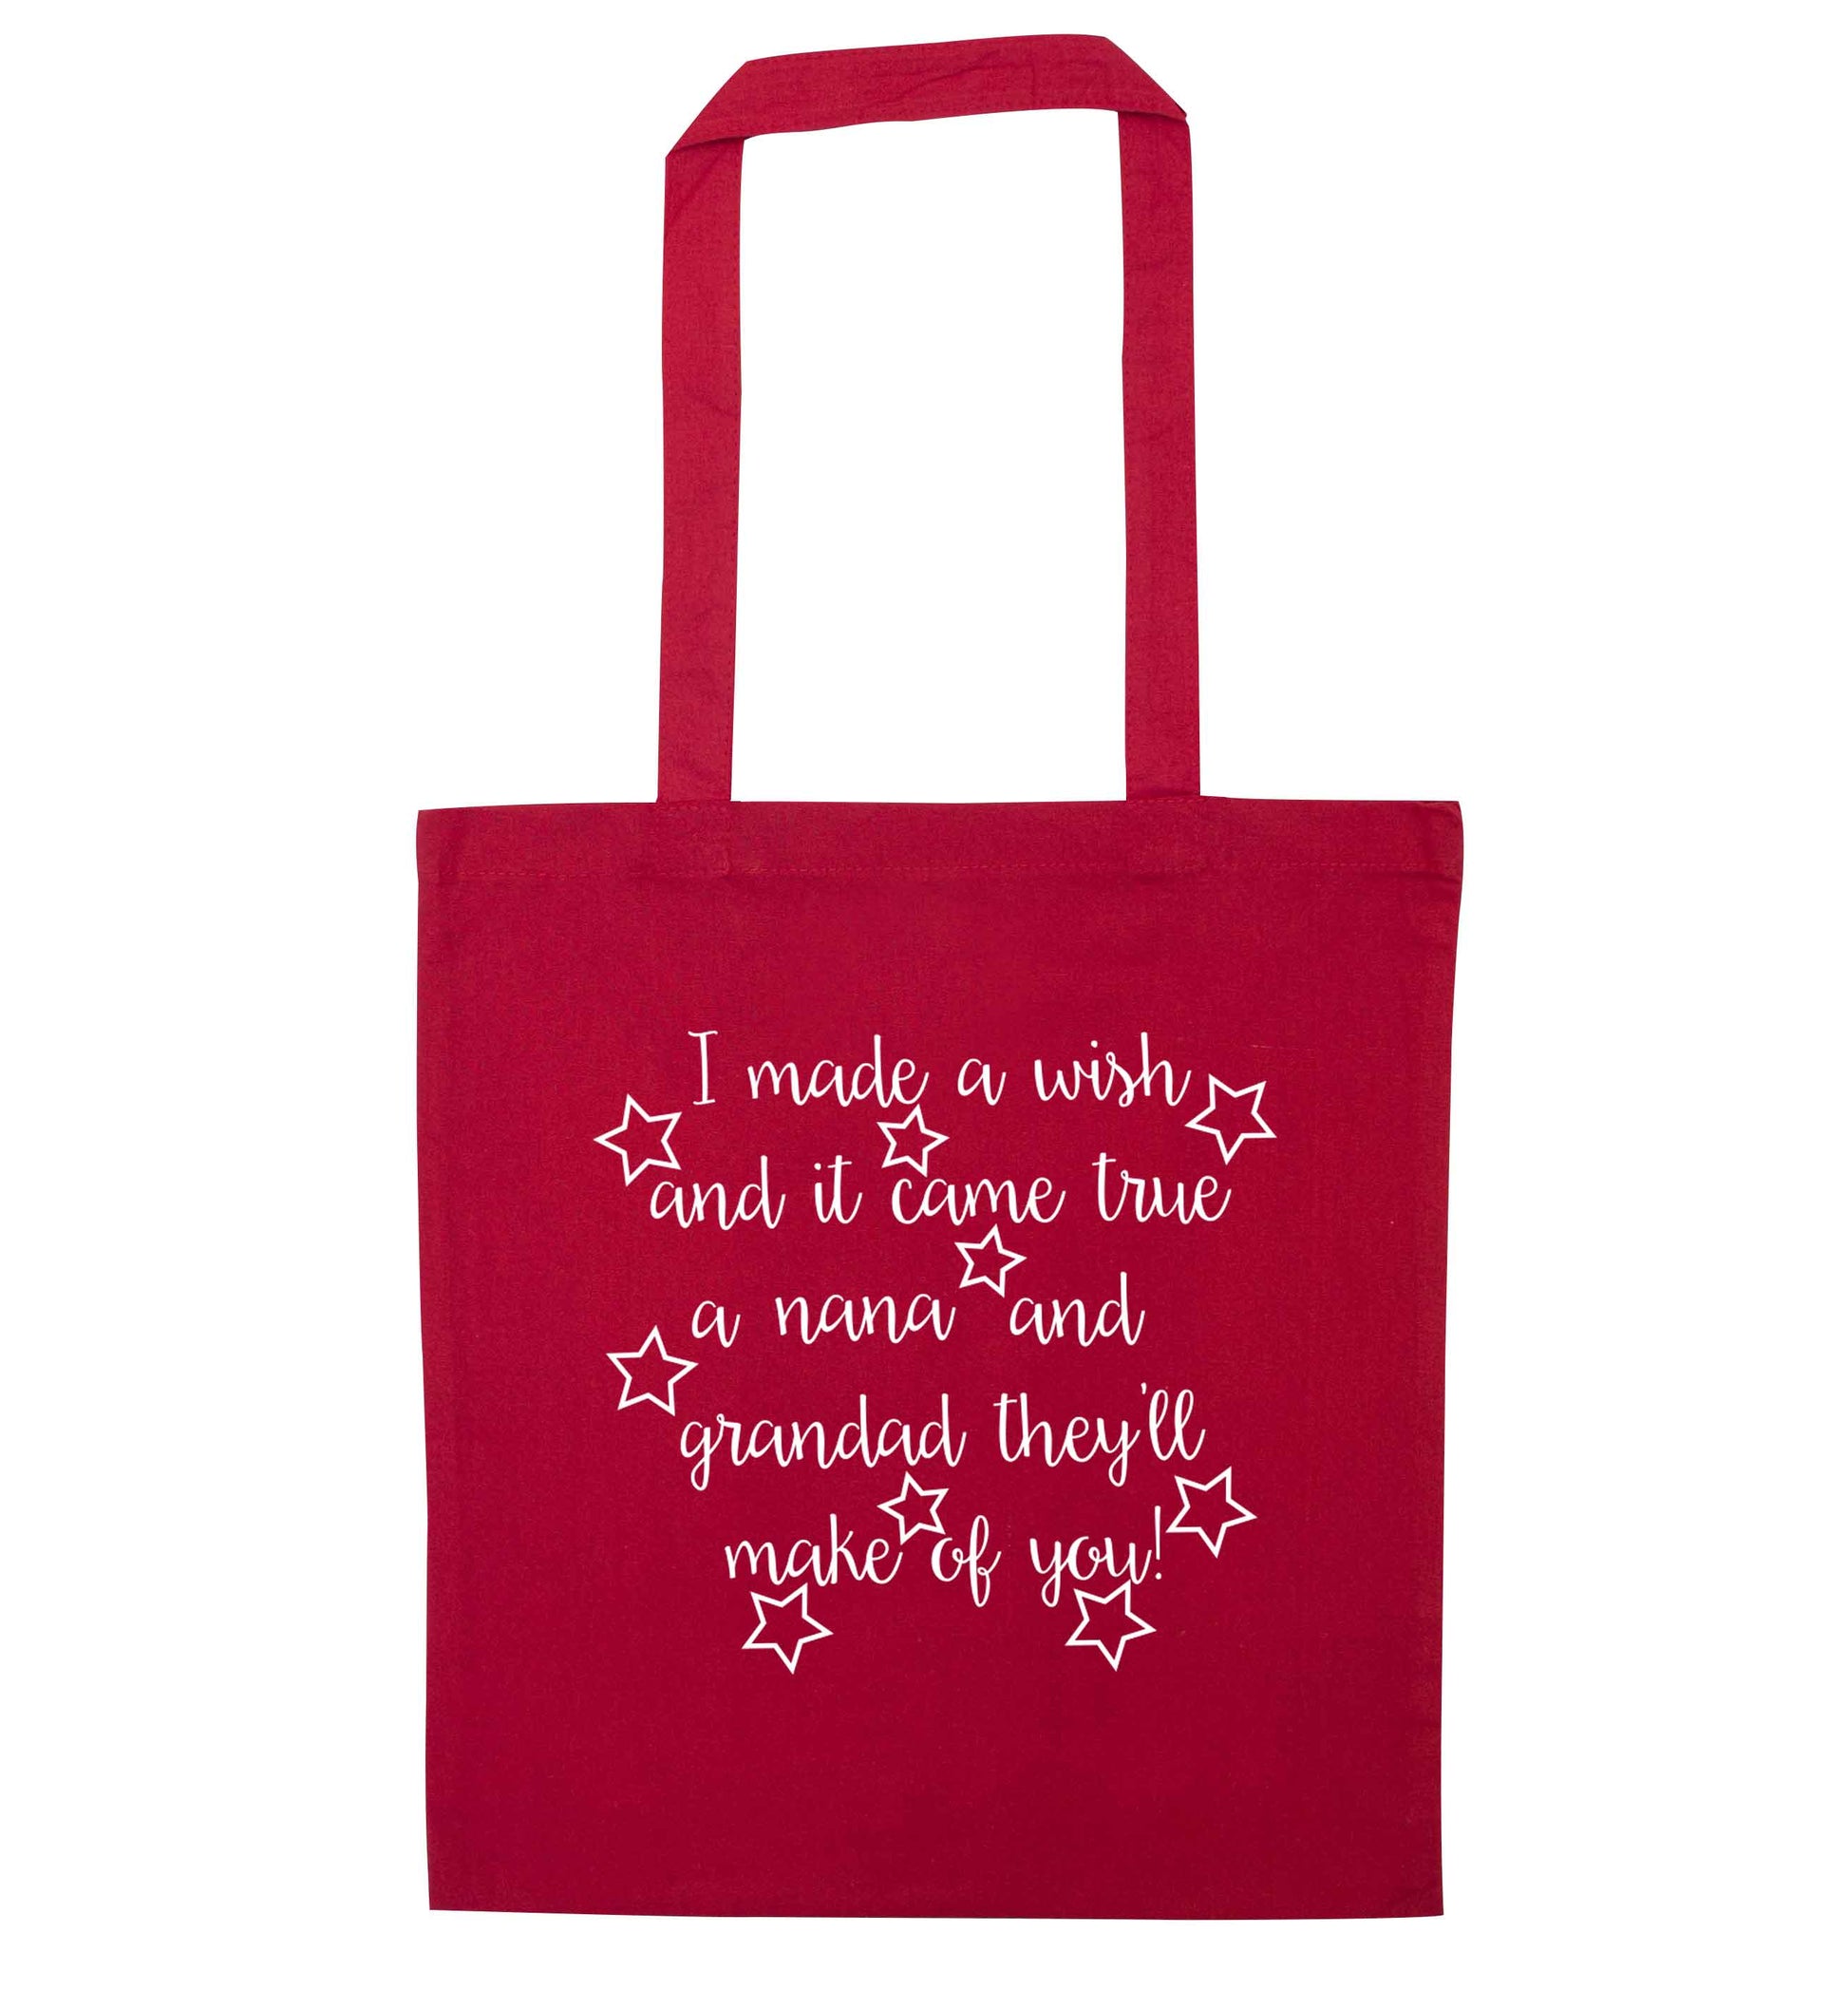 I made a wish and it came true a nana and grandad they'll make of you! red tote bag